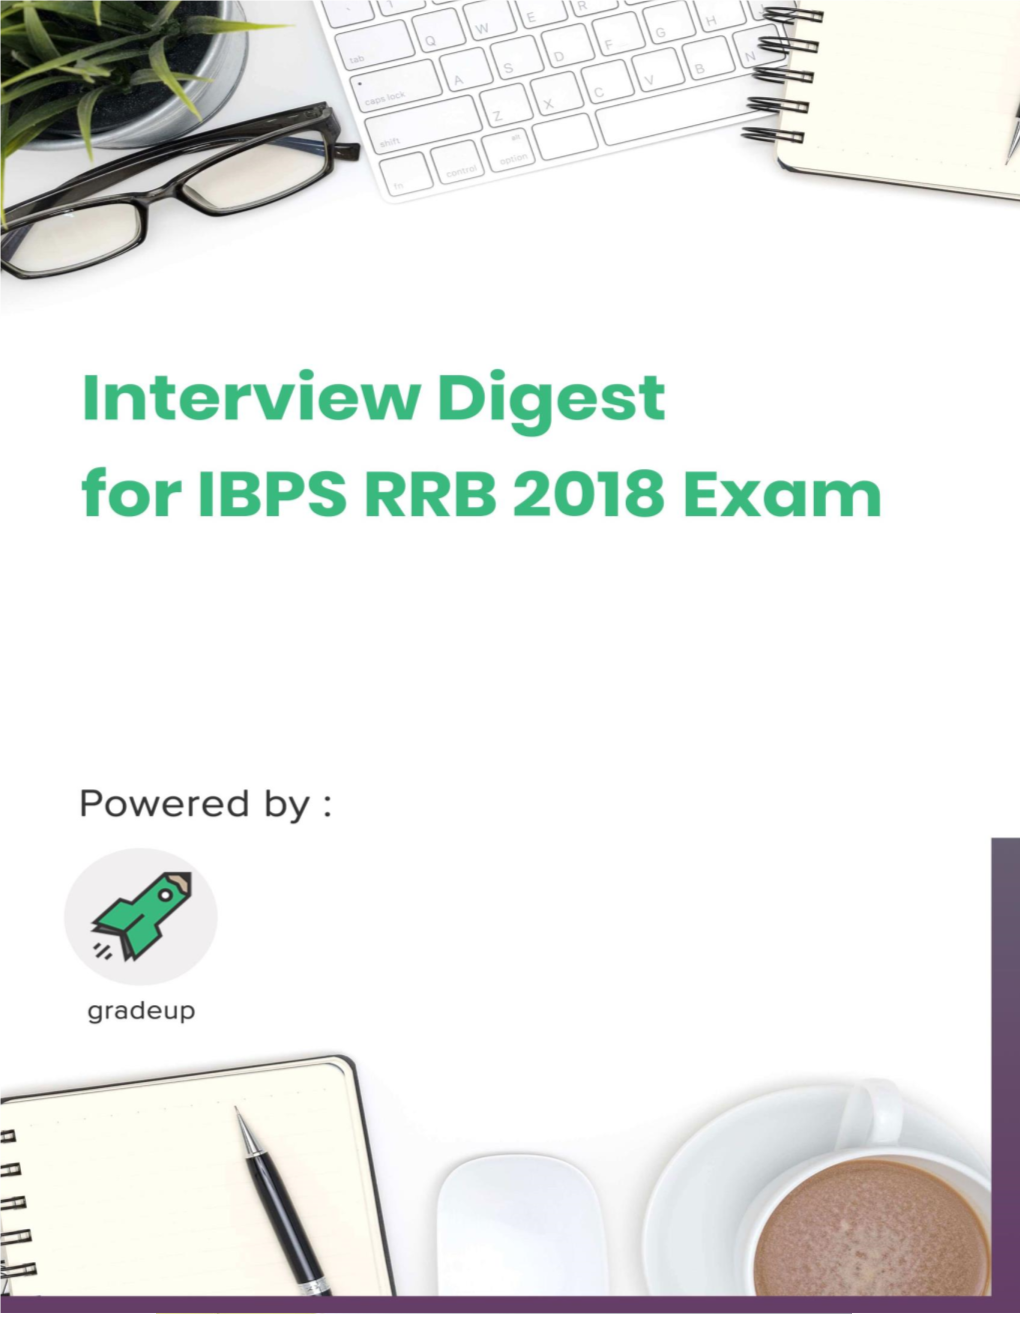 Download Interview Digest for IBPS RRB 2018 Exam